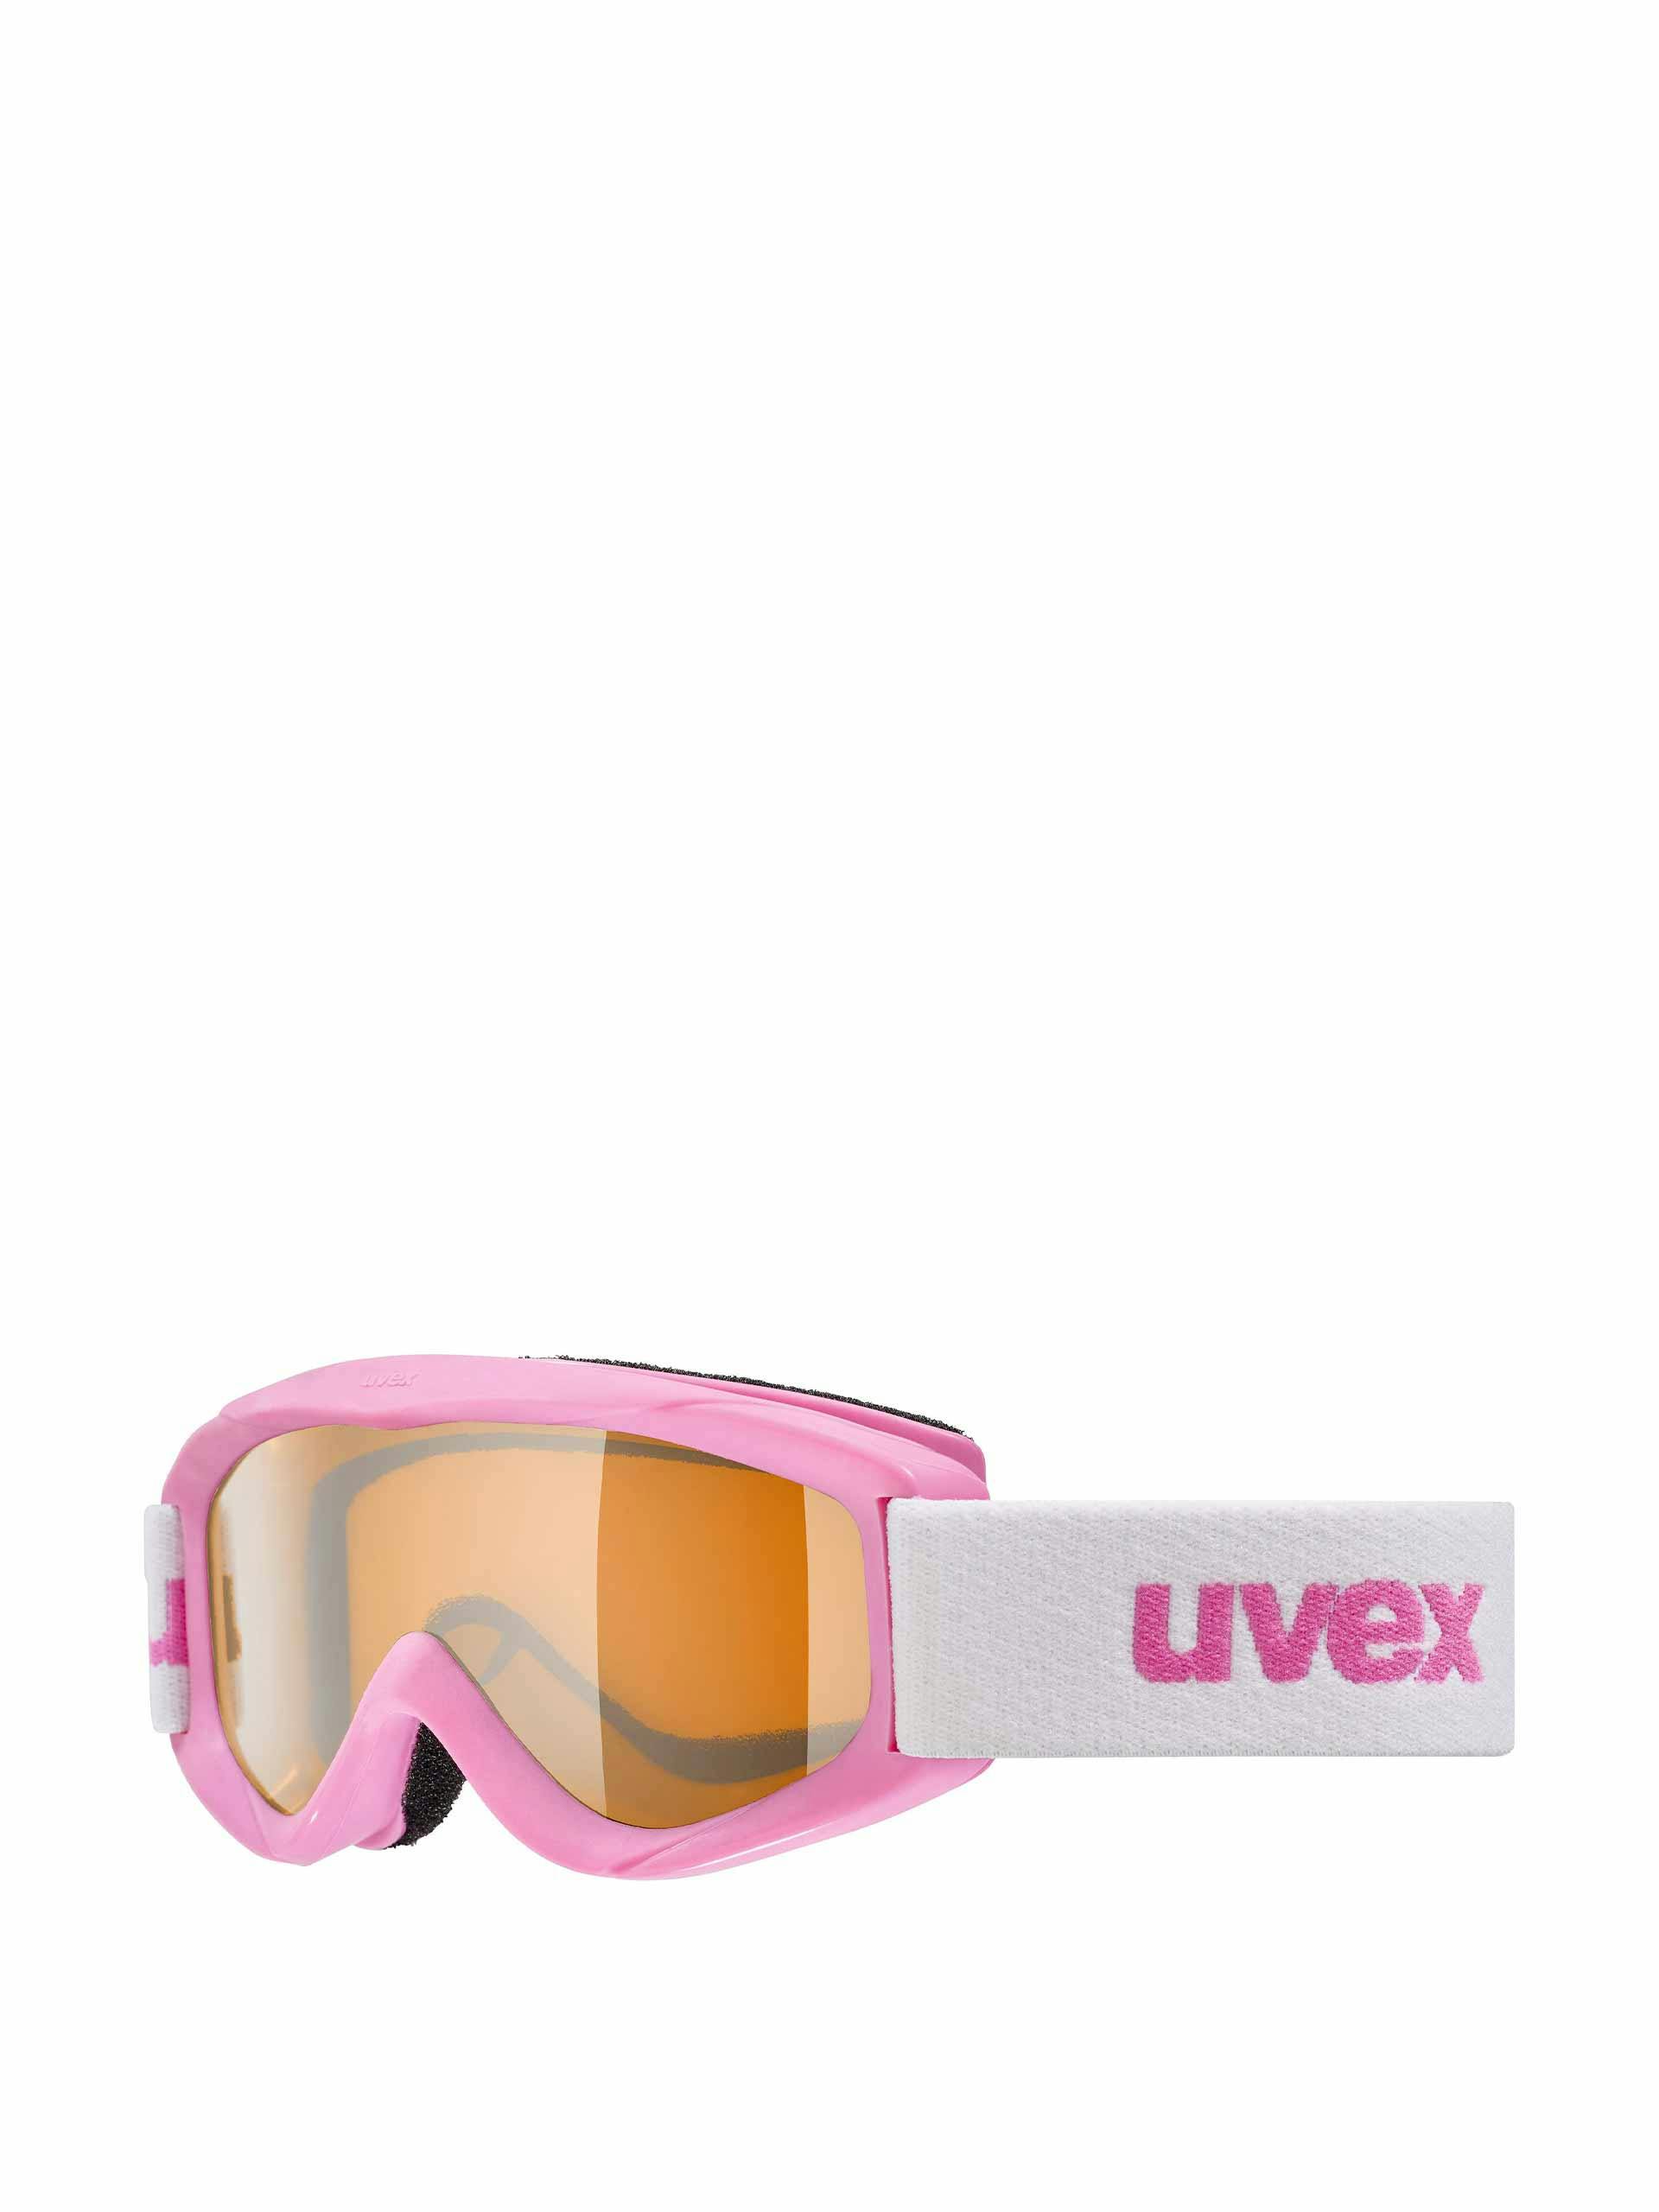 Infant skiing goggles